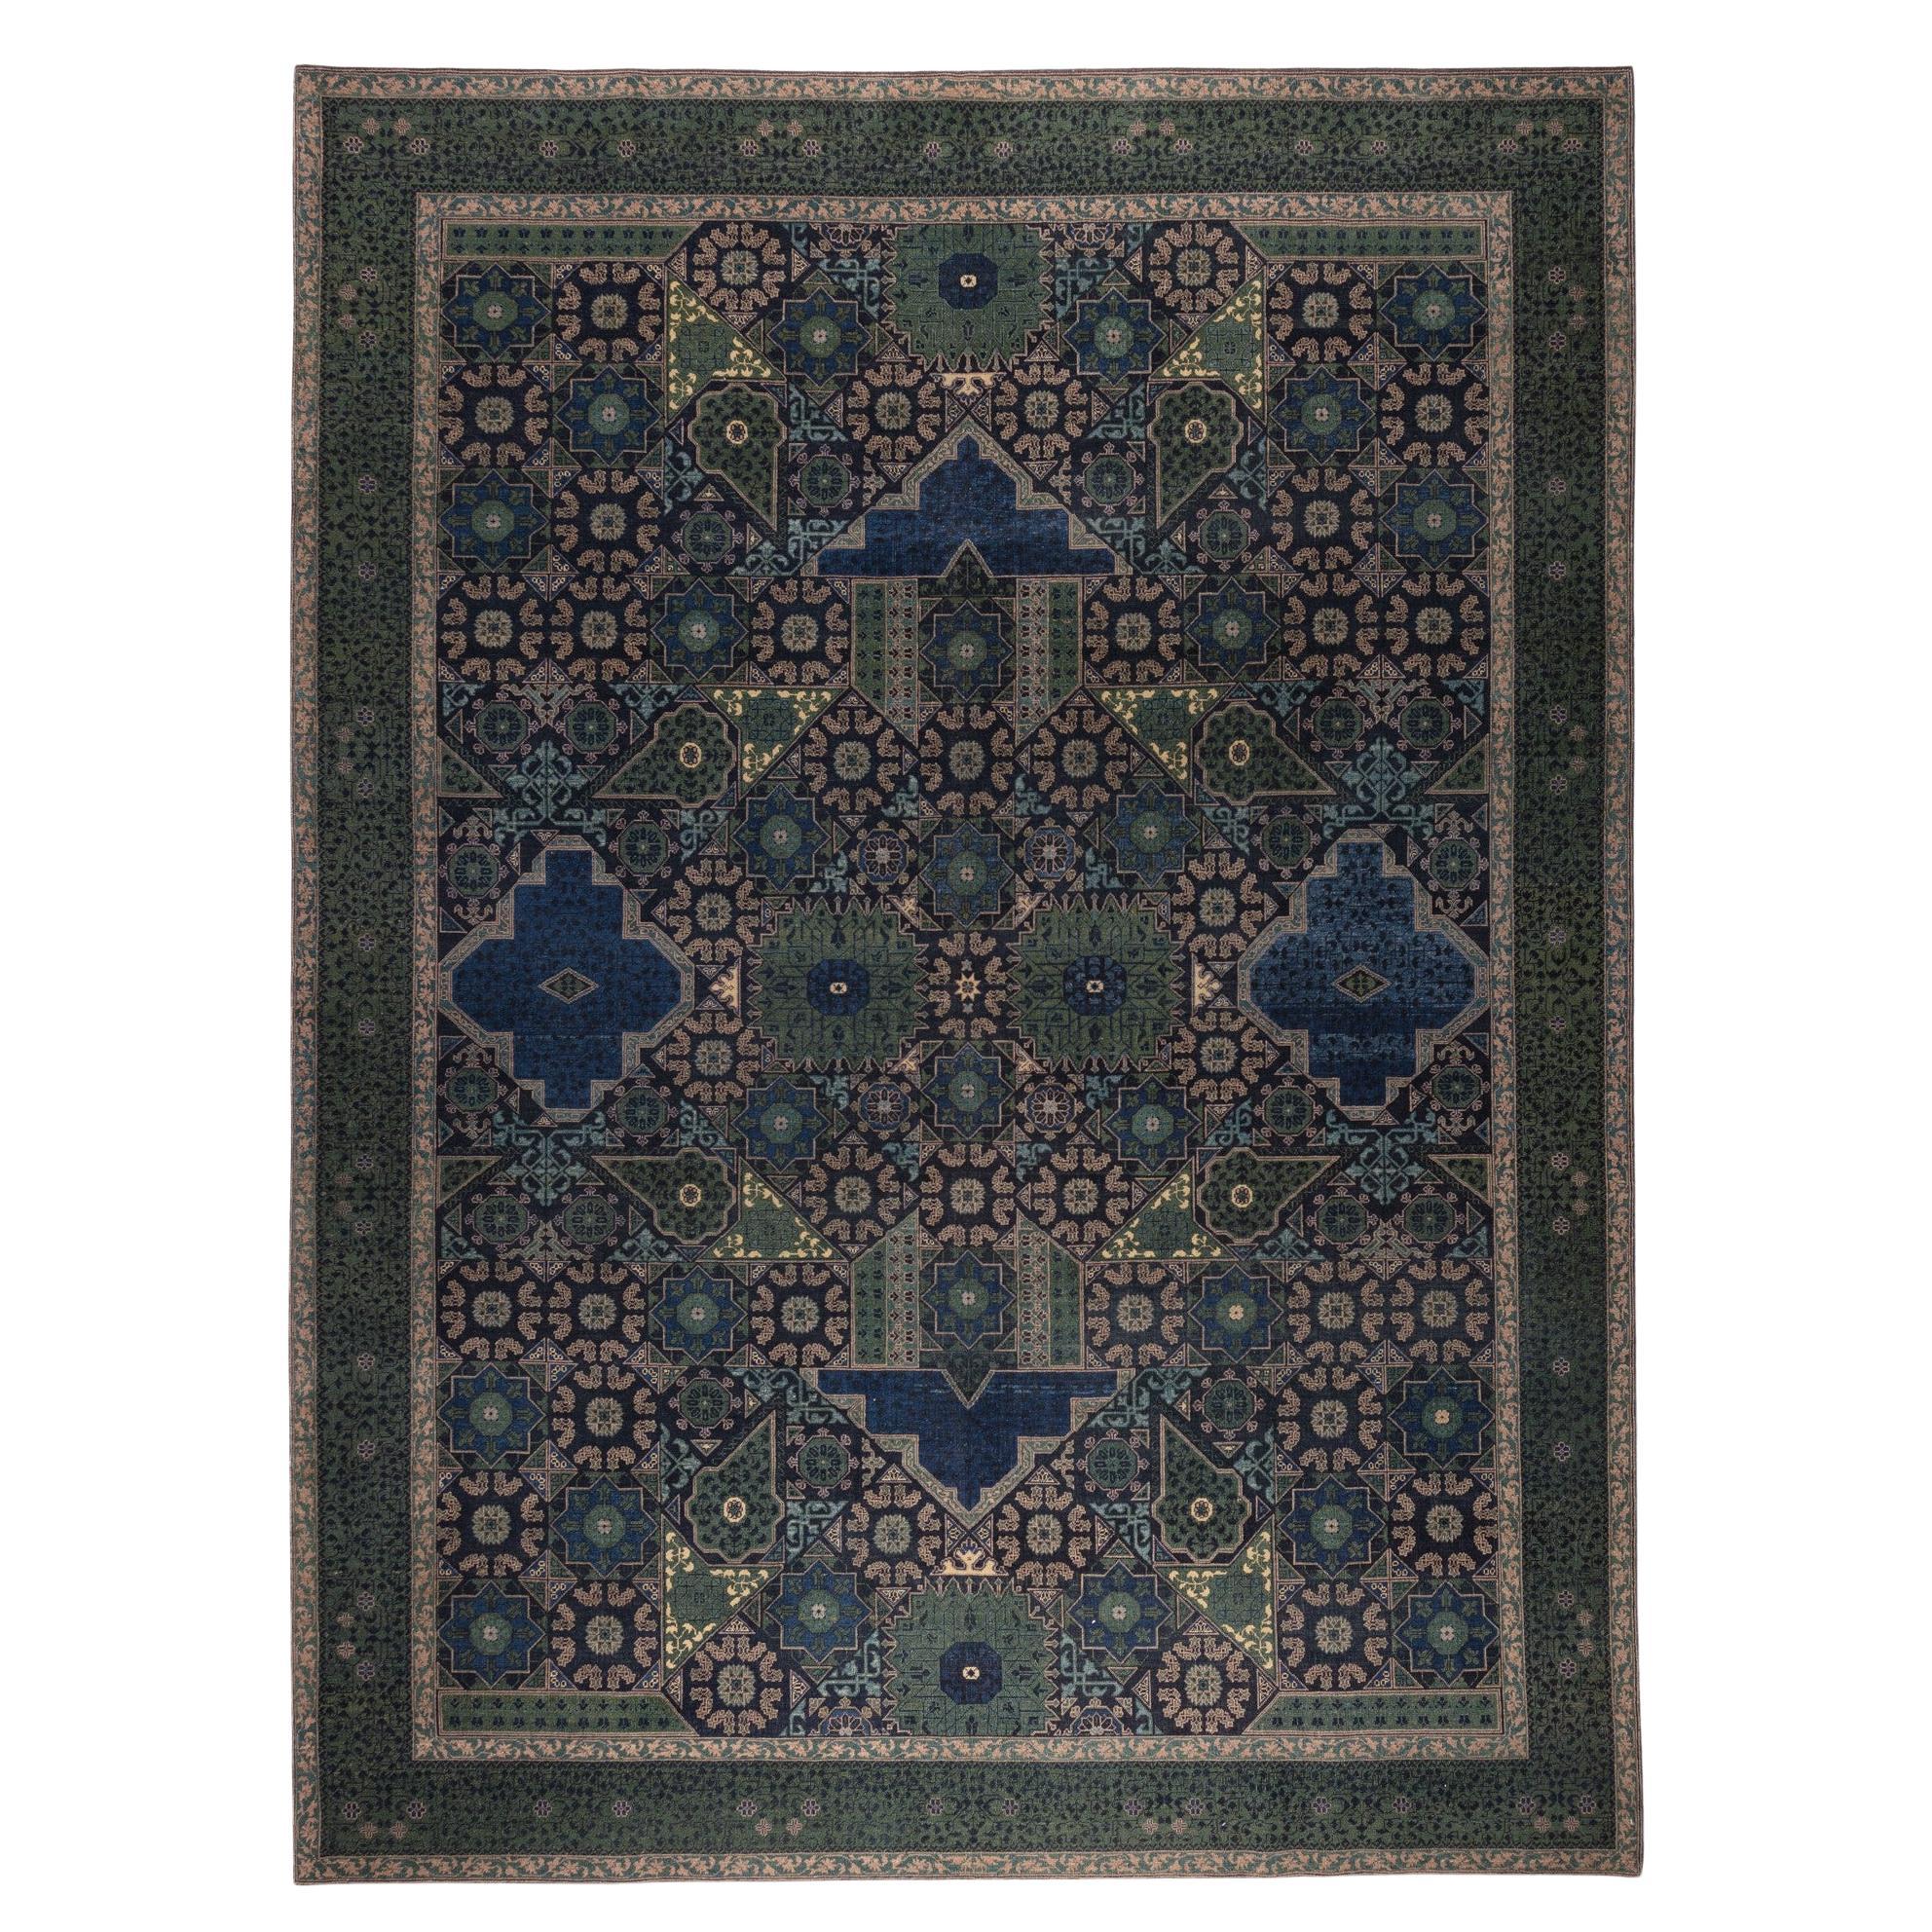 Ararat Rugs Mamluk Carpet, 16th Century Antique Revival Rug, Natural Dyed For Sale